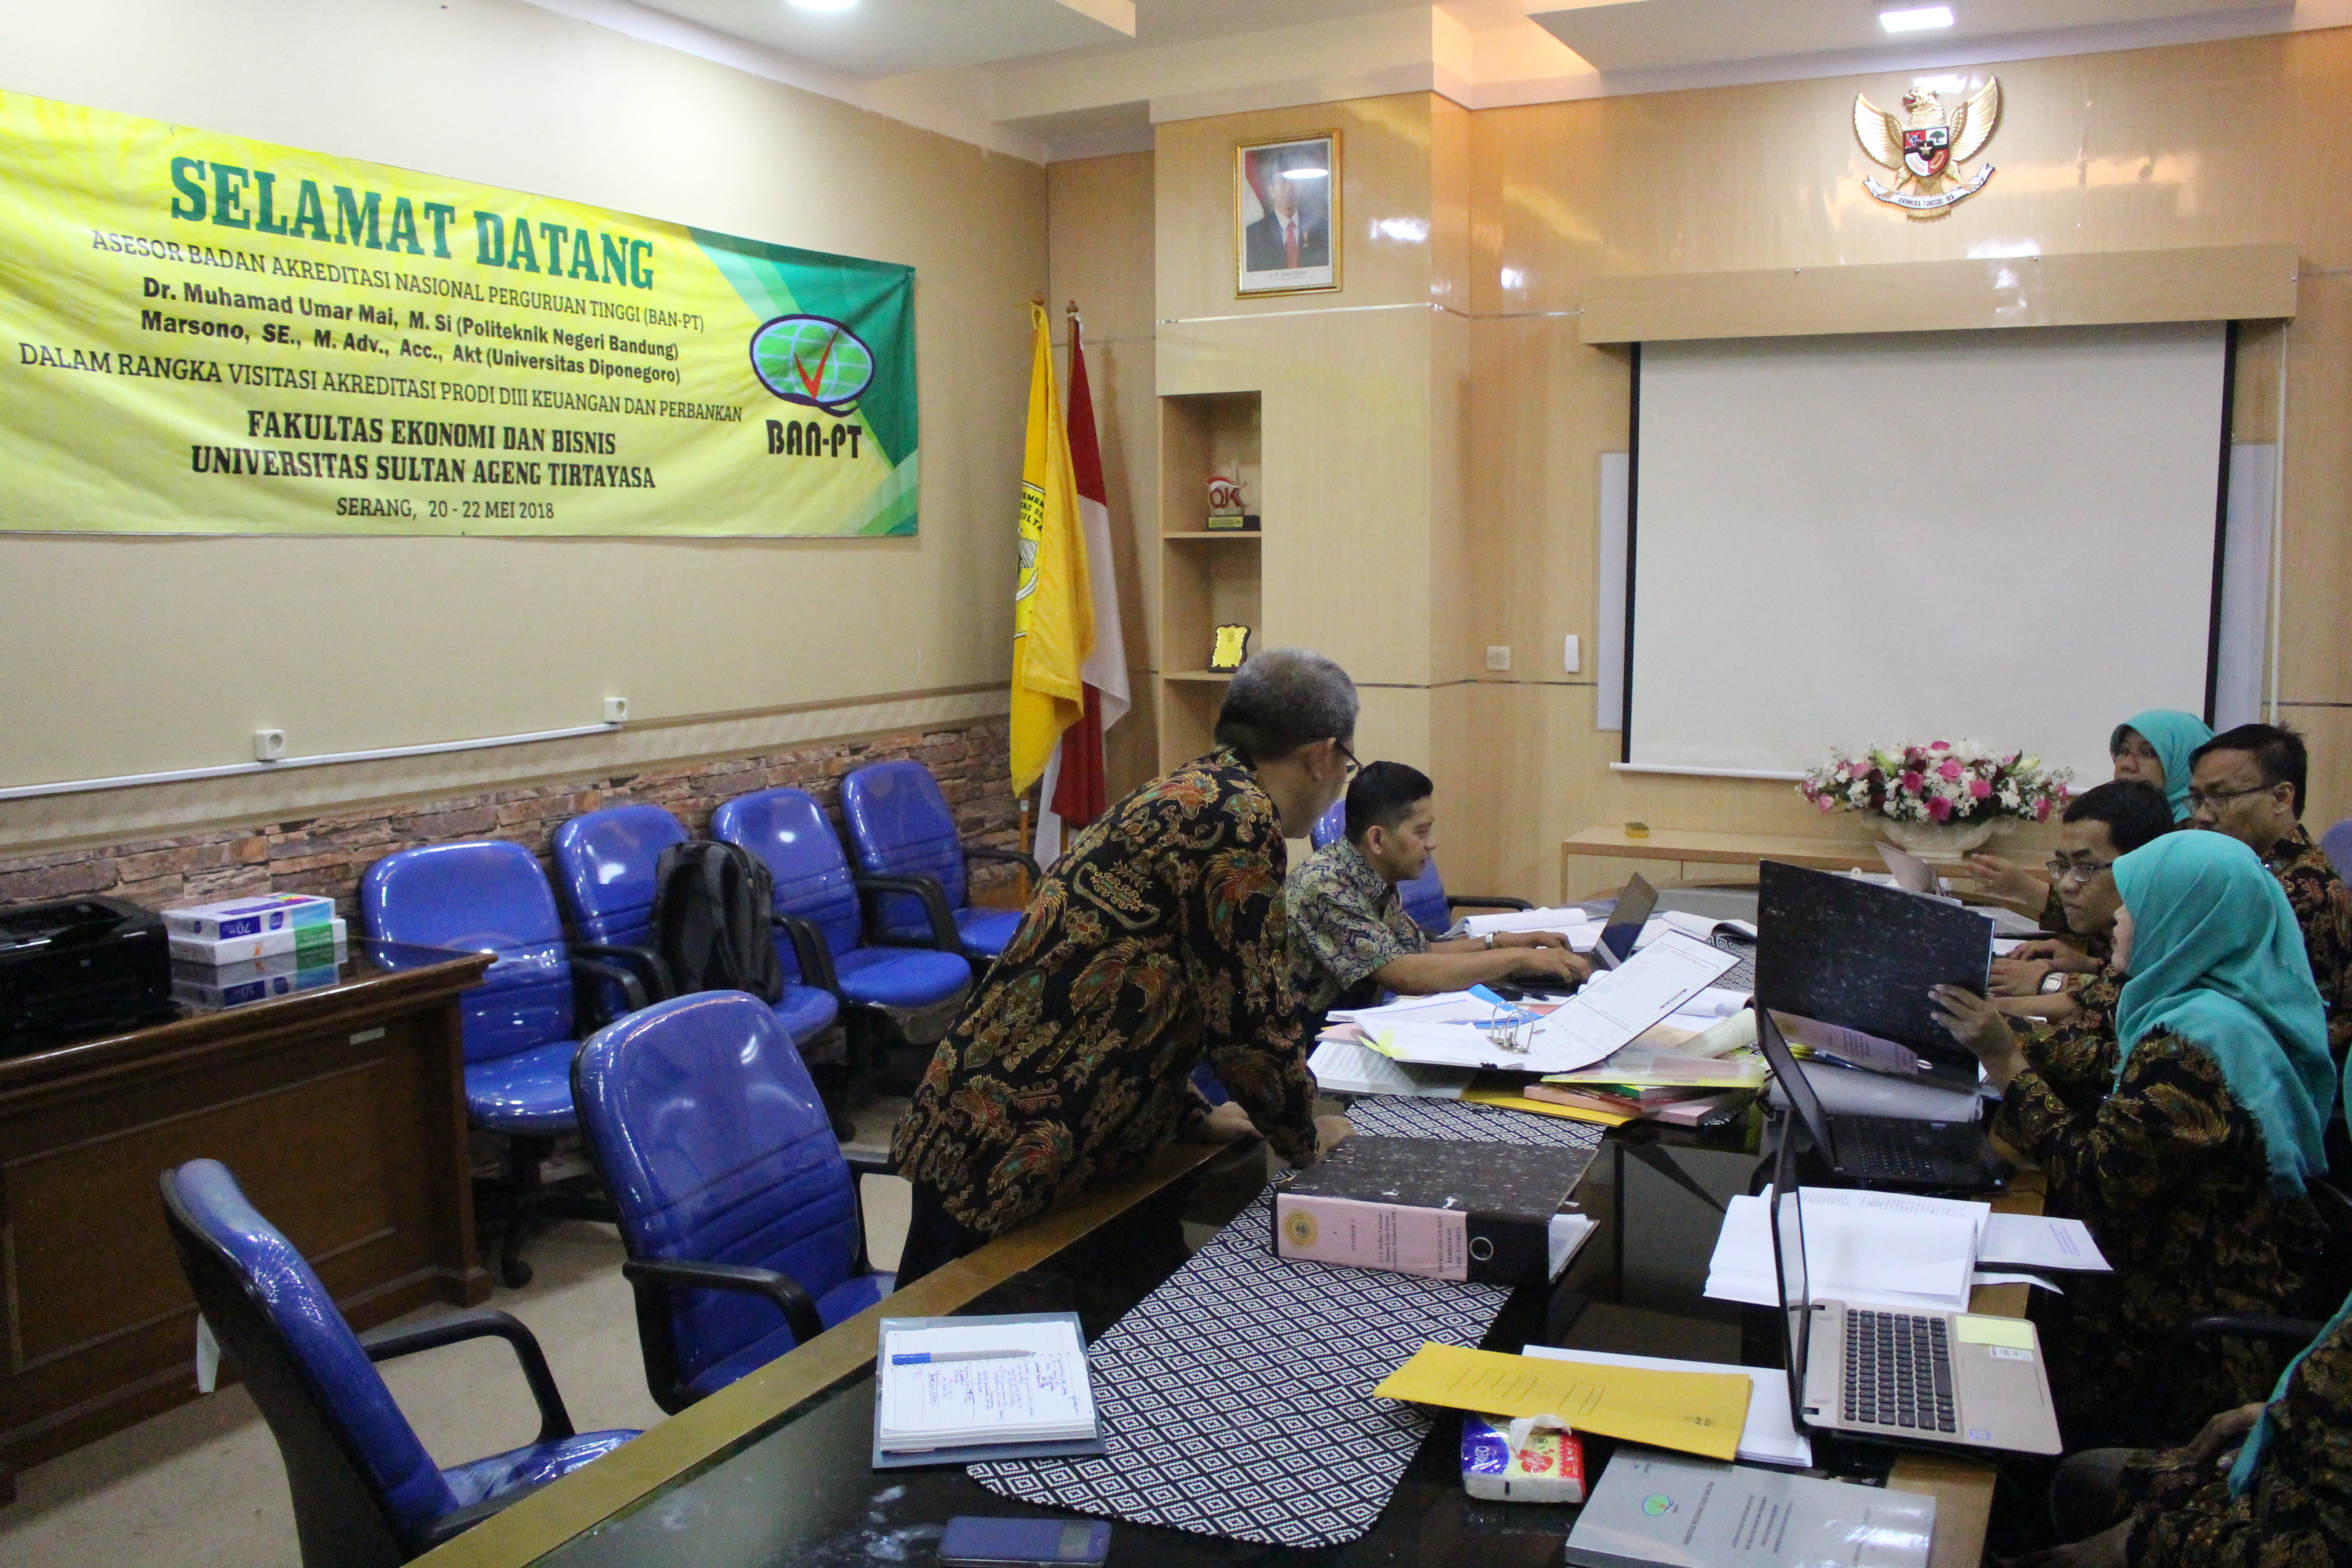 2 ASSESSORS OF TIRE PT VISIT UNTIRTA FOR REALIZING BANKING FINANCIAL PRODUCT Bimbel